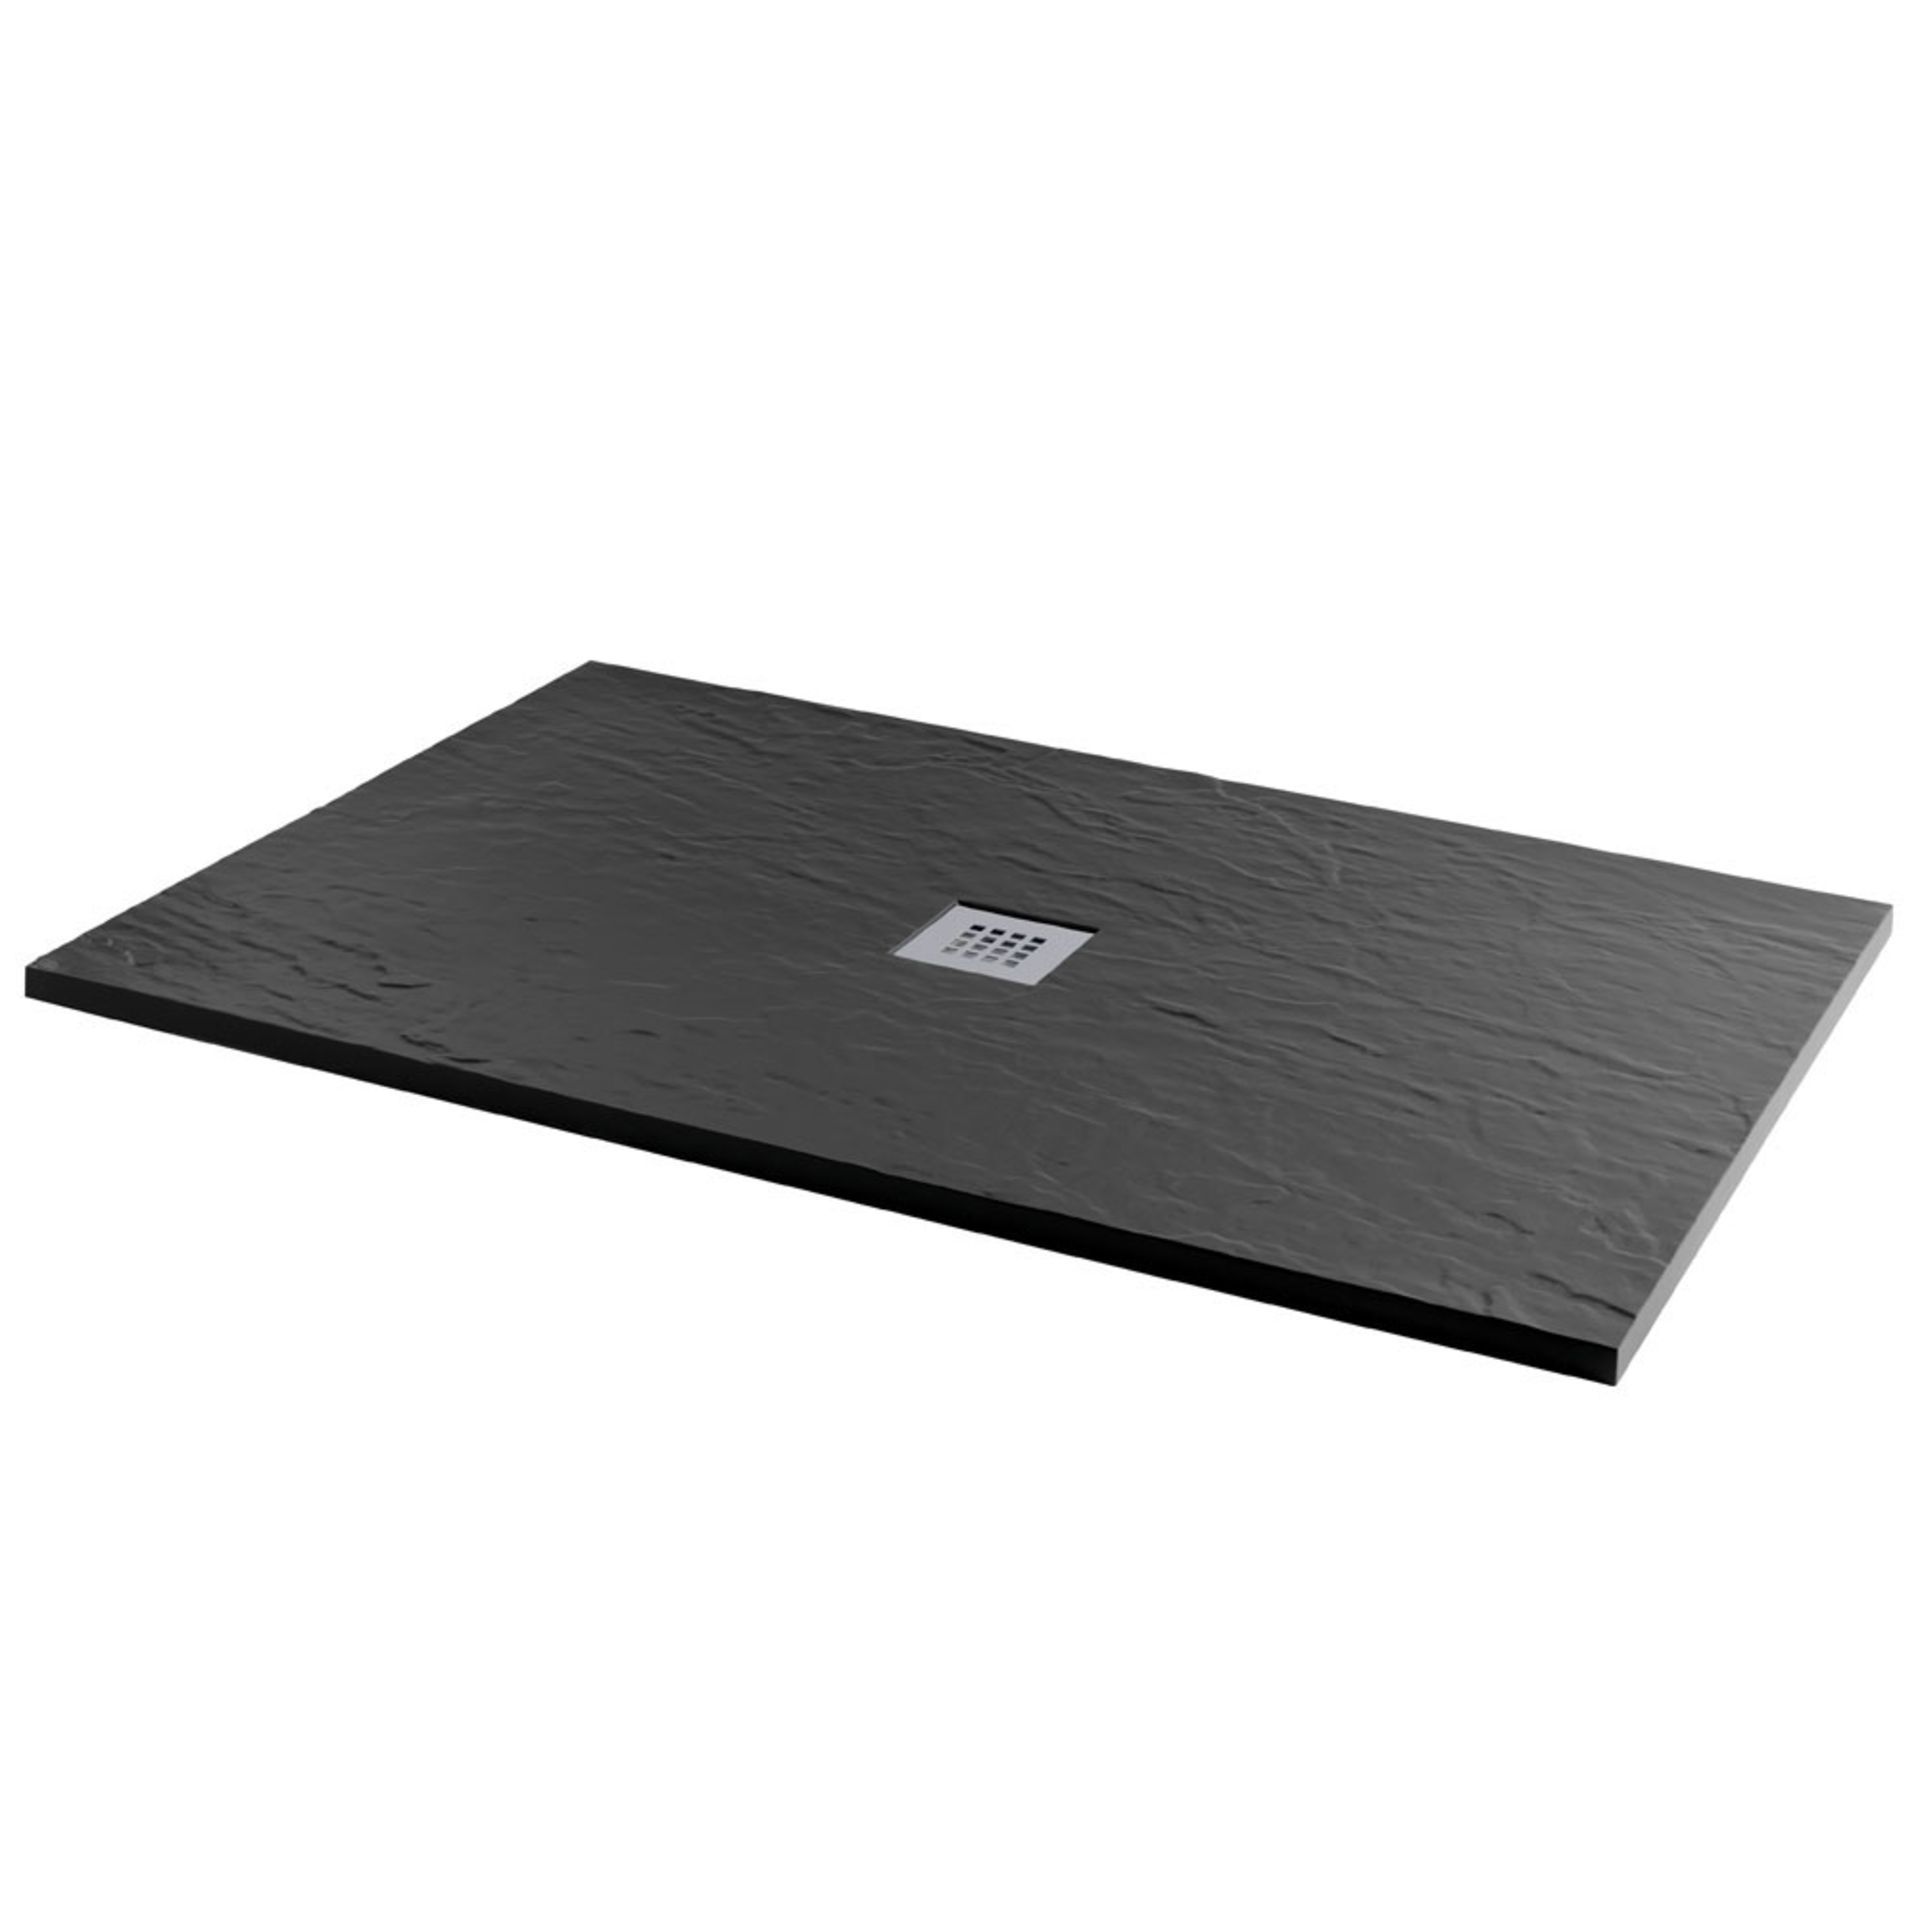 NEW 1200x900mm Rectangle Black Slate Effect Shower Tray.RRP £769.99.A textured black slate eff... - Image 2 of 2